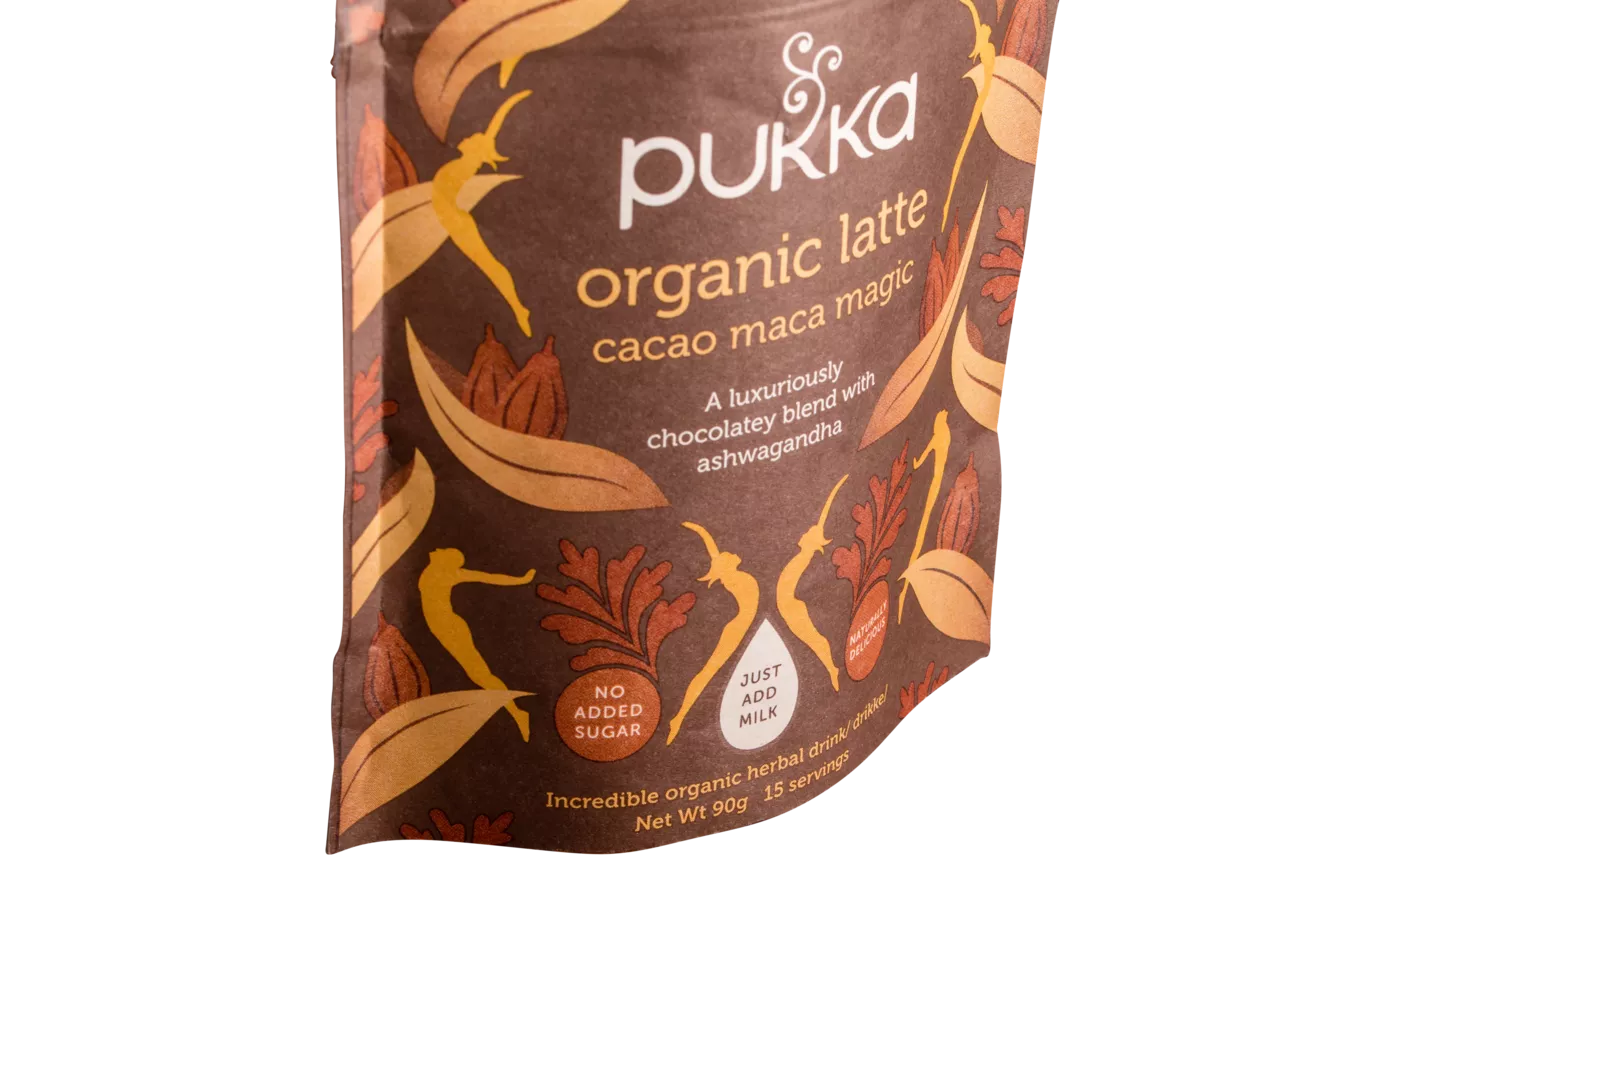 PaperWise sustainable paperorganic board pouch tea coffee latte environmentally responsible packaging Pukka8c